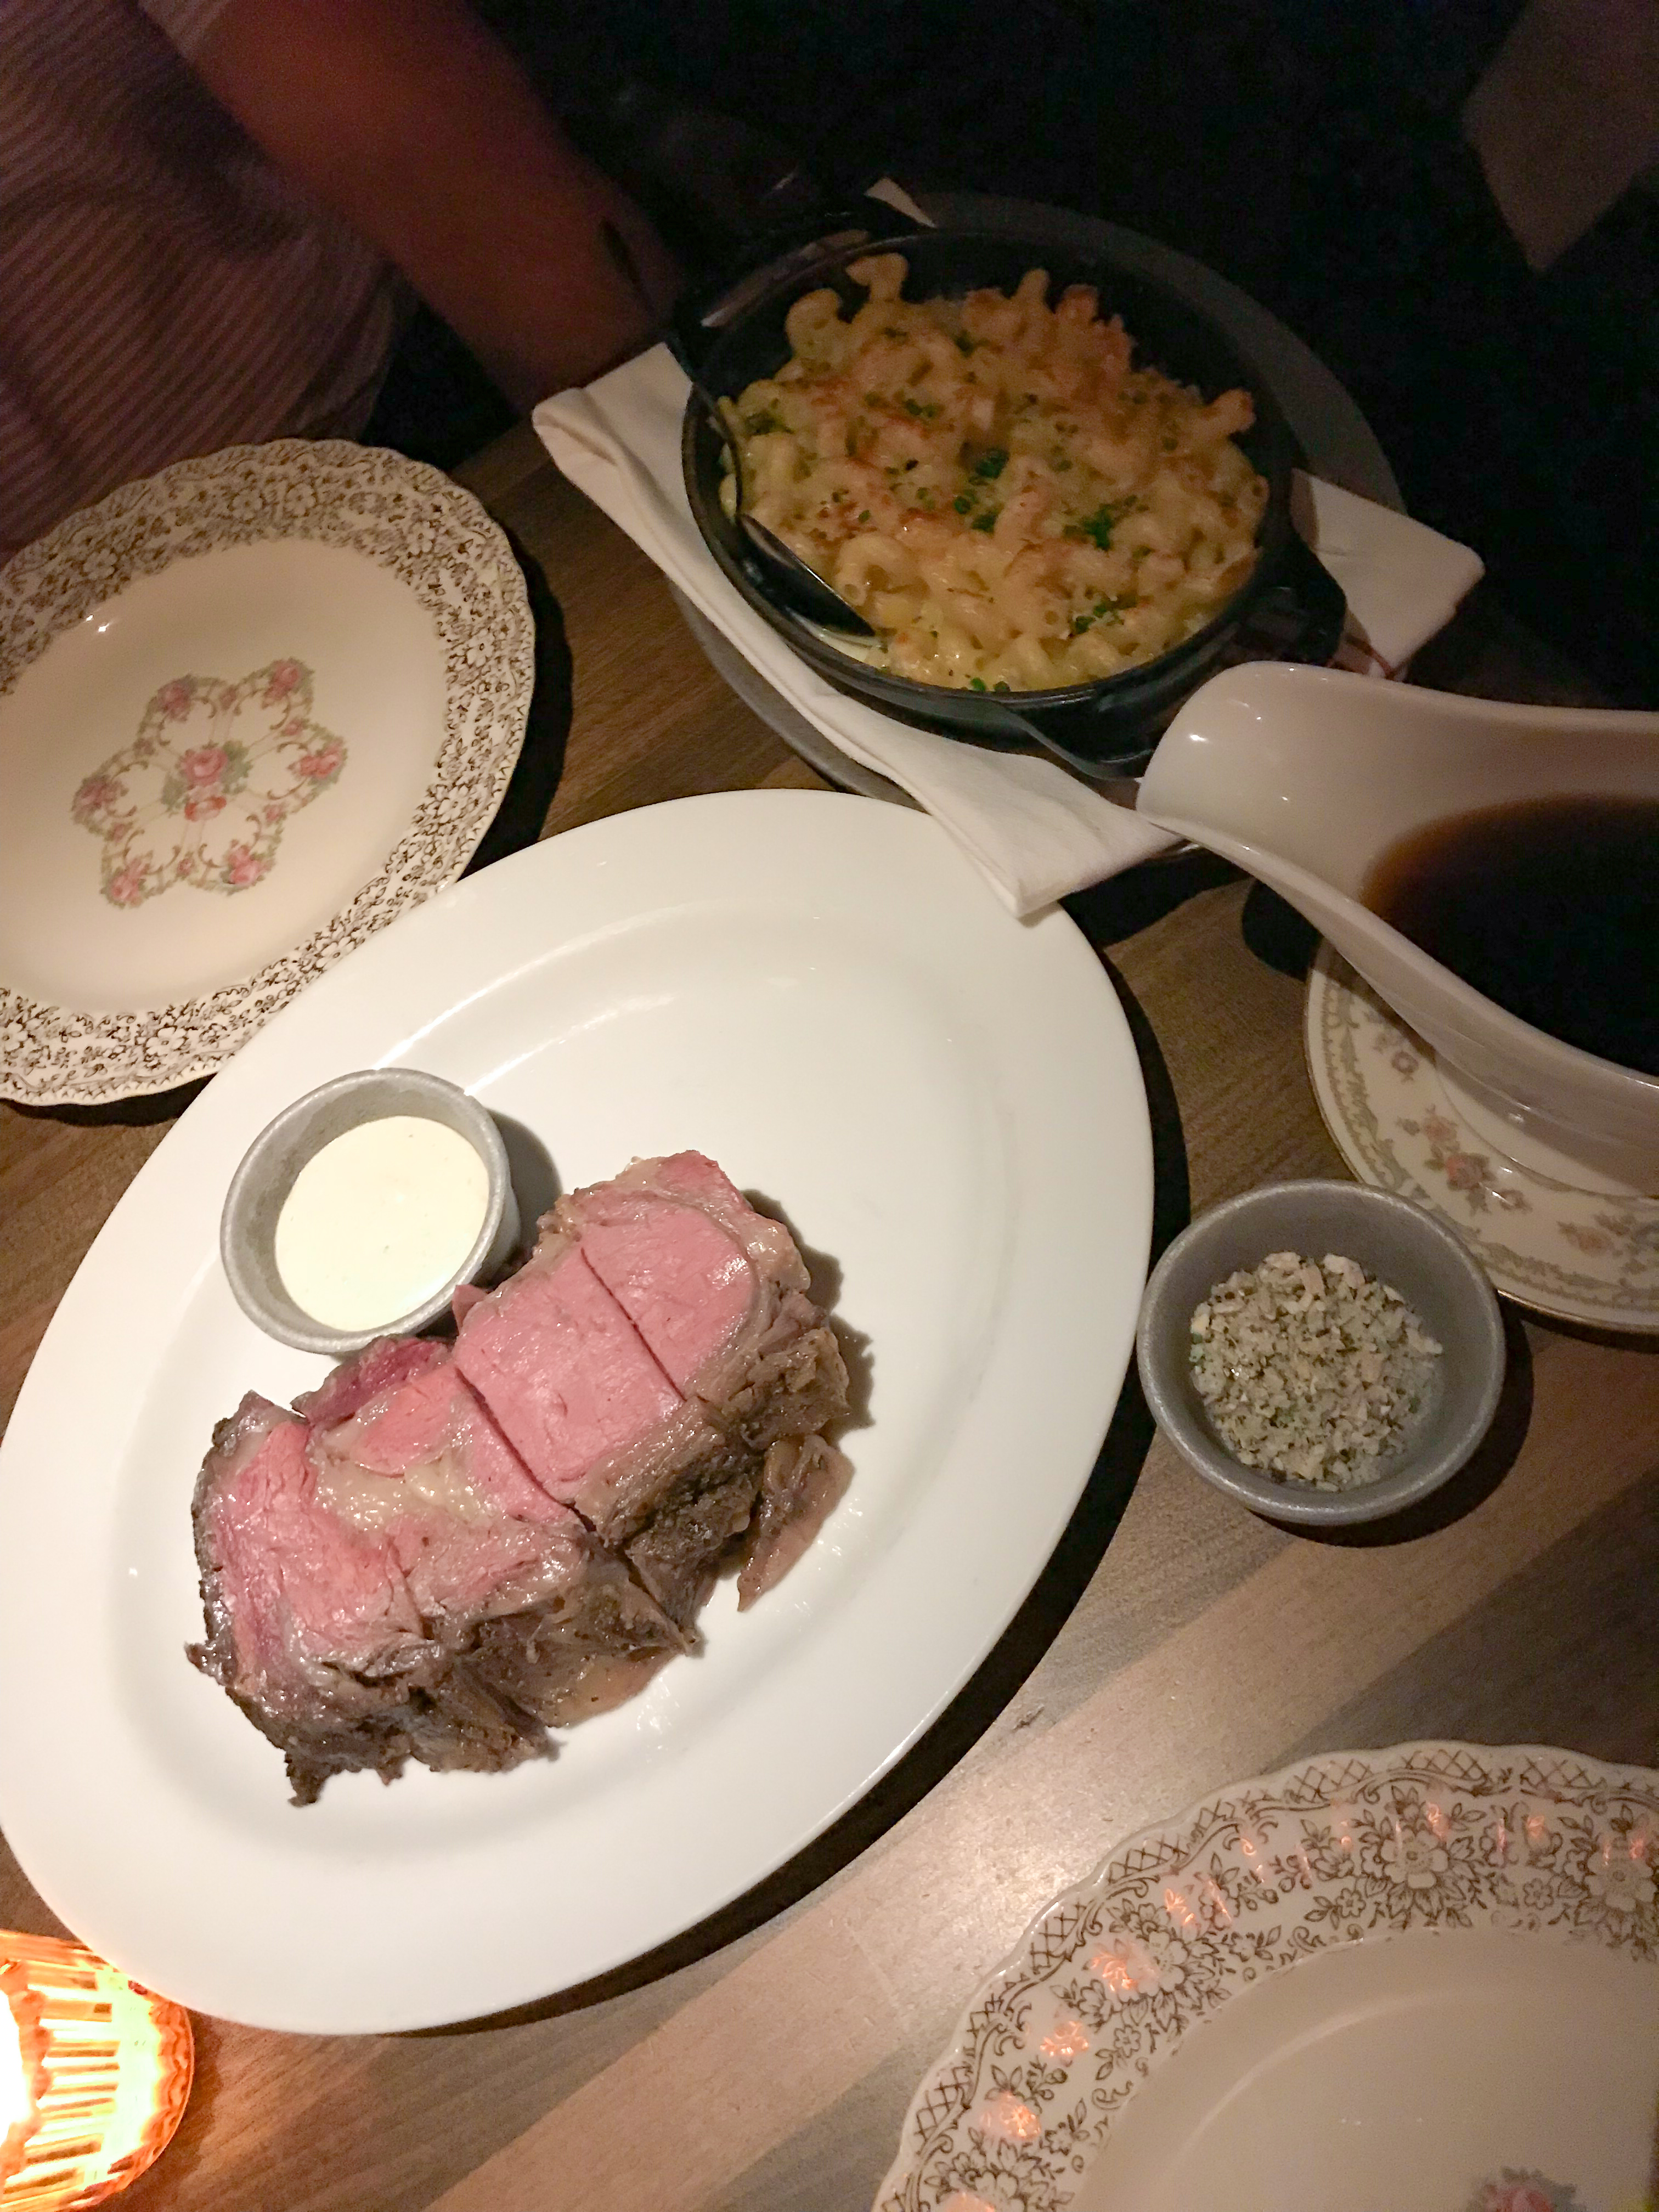 A must read! An NYC restaurant guide featuring all of New York City's best restaurants, from brunch to late night dinners. It even details key dishes to try at each restaurant! 4 Charles Prime Rib is a must!